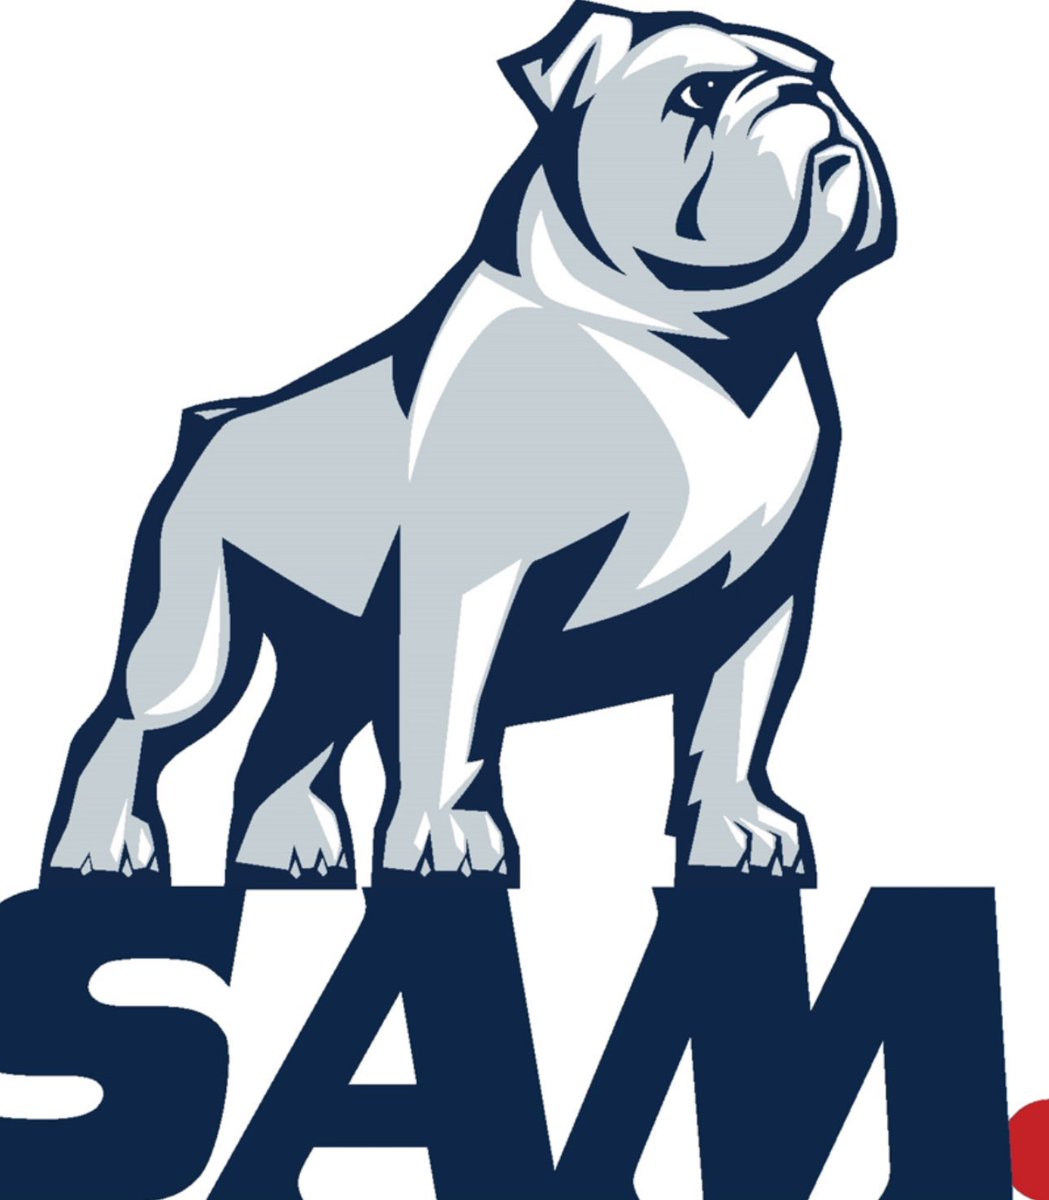 I’m blessed to receive an offer from @SamfordFootball. Thank you @RickyTurner19 for coming out to see me practice and to meet my parents!! @RecruitLambert @deucerecruiting @CoachDaniels06 @JeremyO_Johnson @ChadSimmons_ @MohrRecruiting @One11Recruiting @TheUCReport @Rivals…